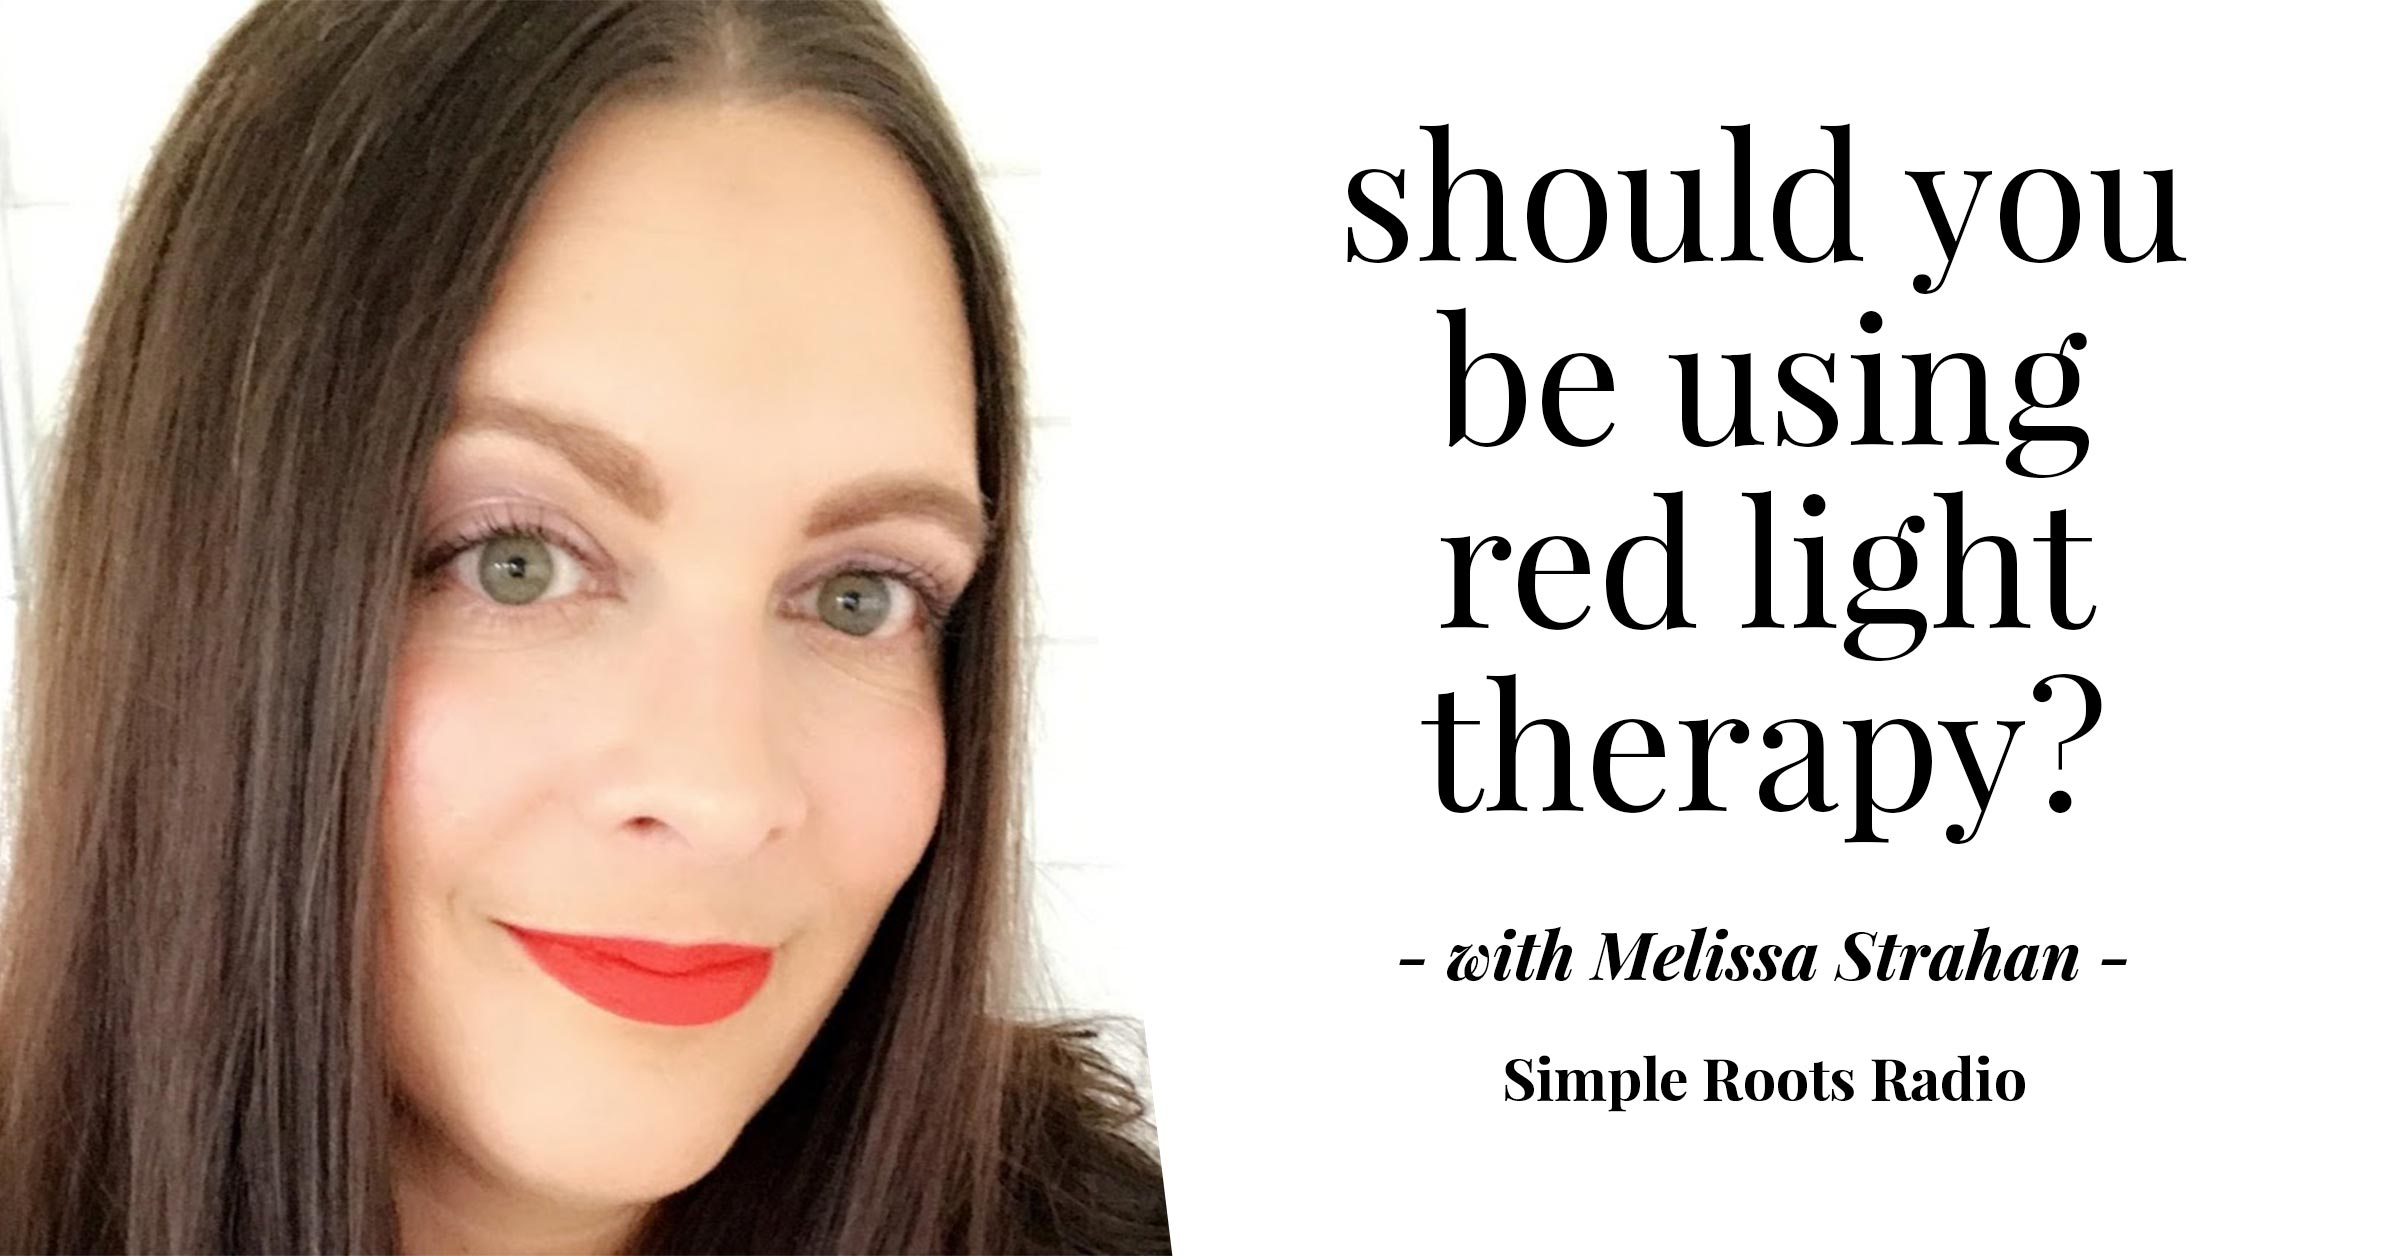 Could Red Light Therapy Work For You? | simplerootswellness.com #podcast #redlight #weightloss #health #wellness #selfcare